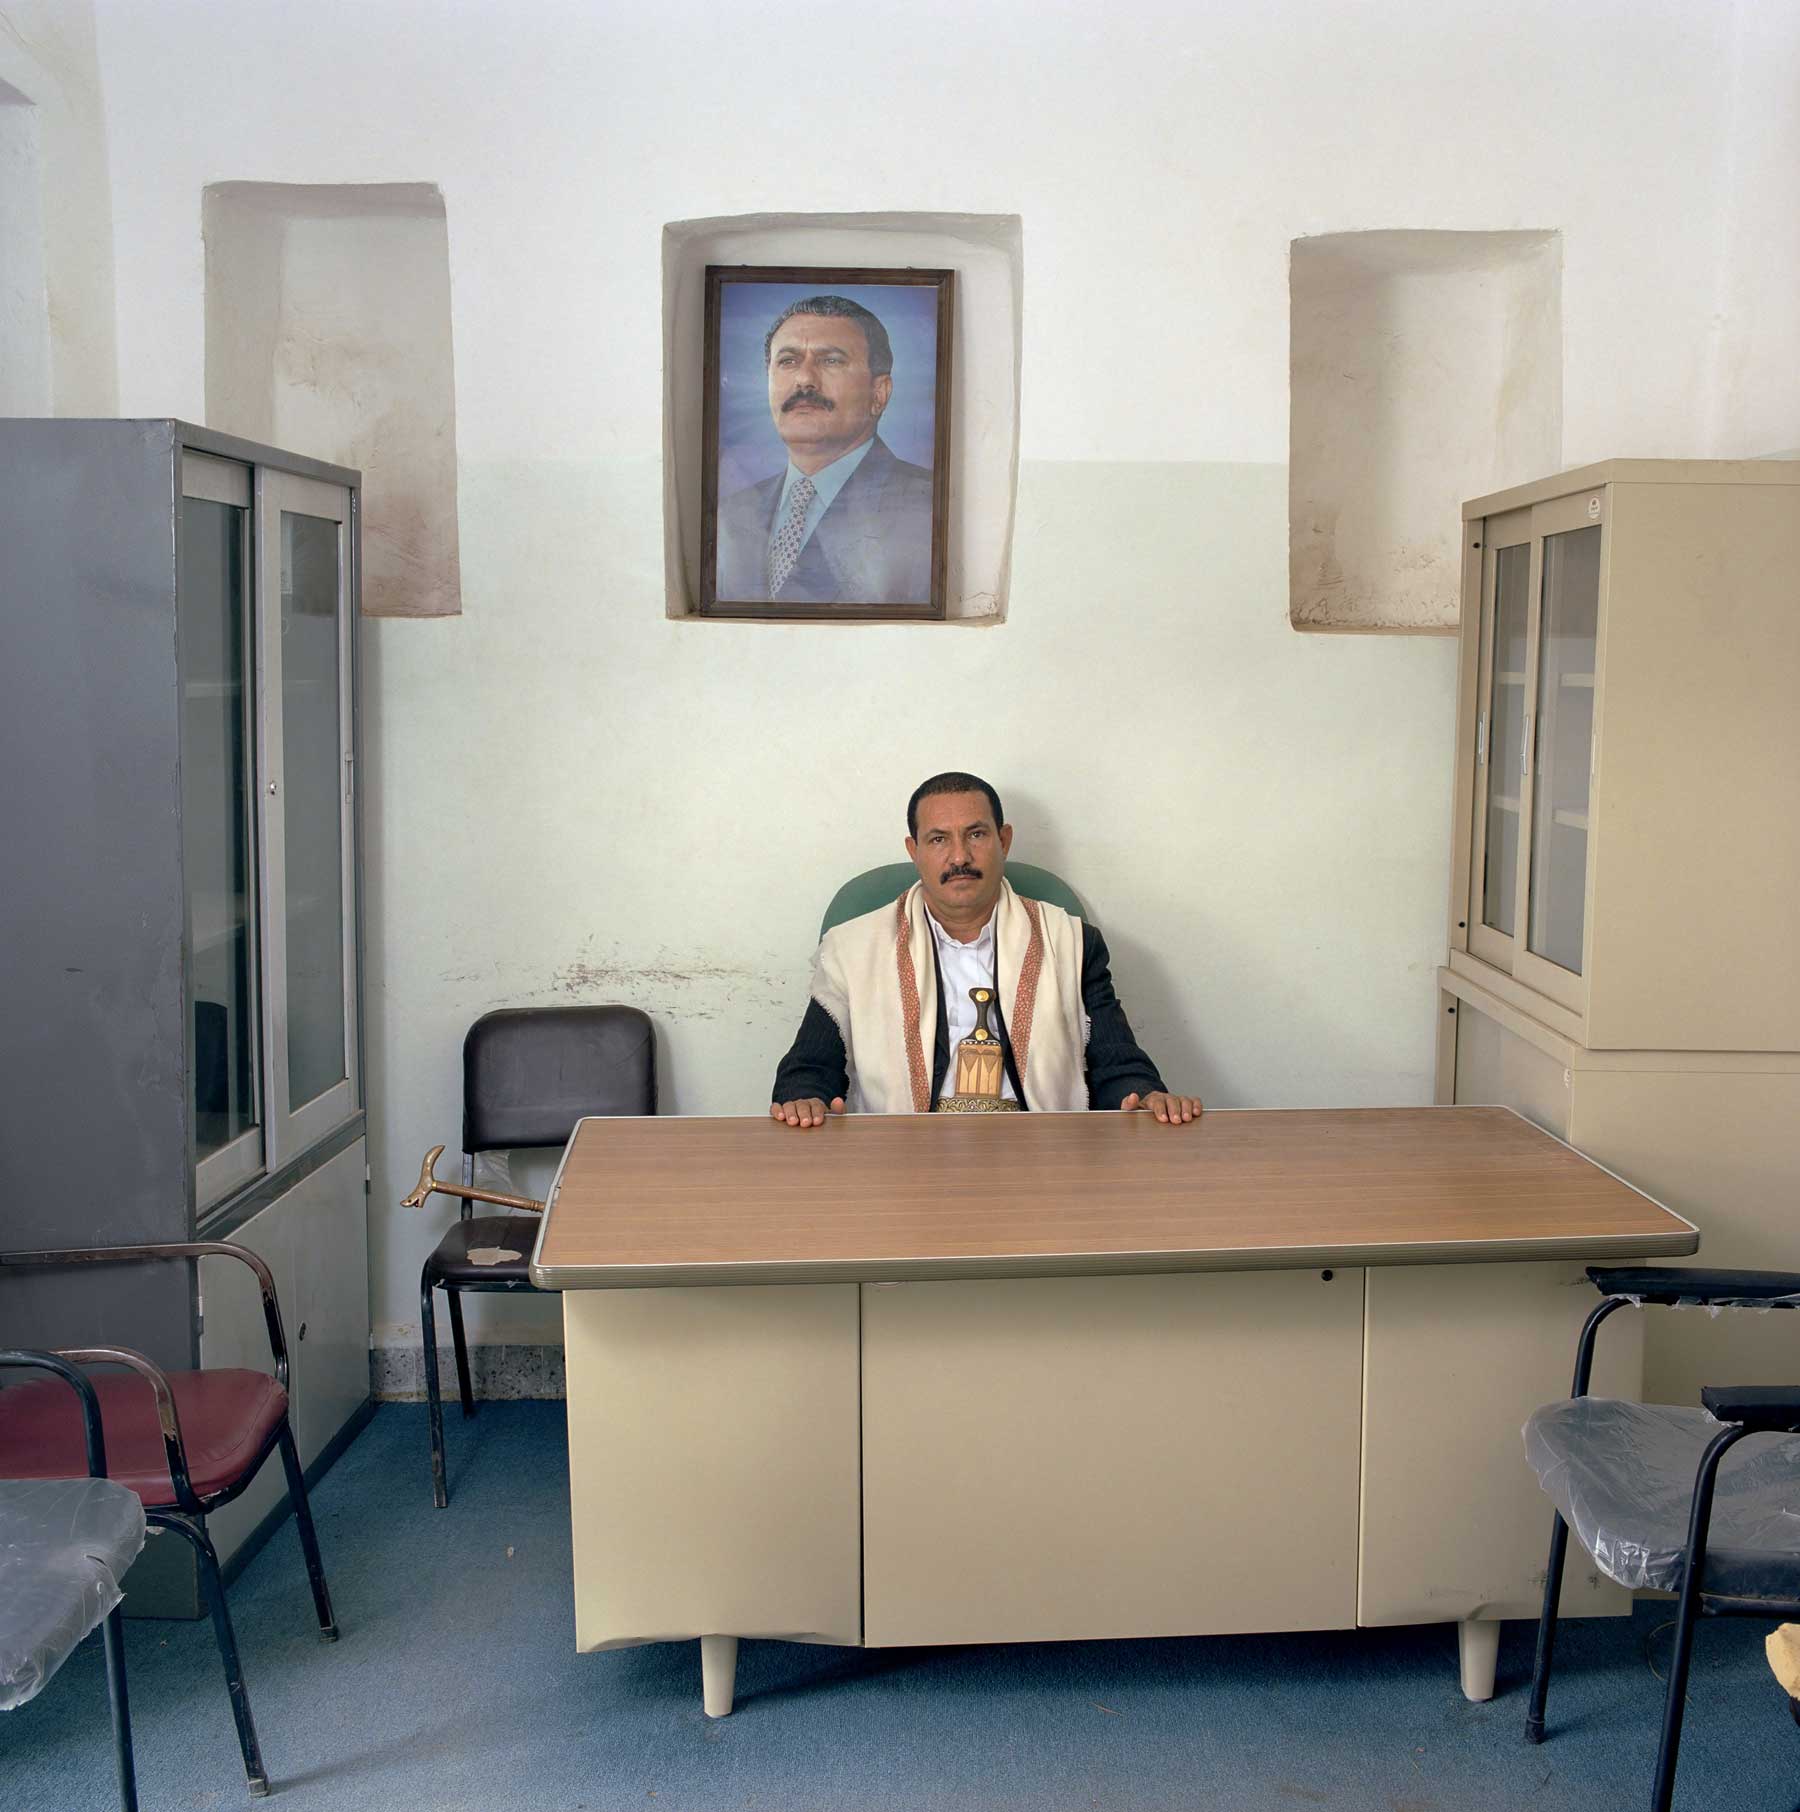 Yemen-16/2006 [Dhi., AA (b. 1955)]
Abdulwali Azablani (b. 1955) is head of the district of Dhi Sufal, Ibb Governorate. Monthly salary: 35,000 Rial ($ 196, euro 135).
Behind him a portrait of president Saleh of Yemen.